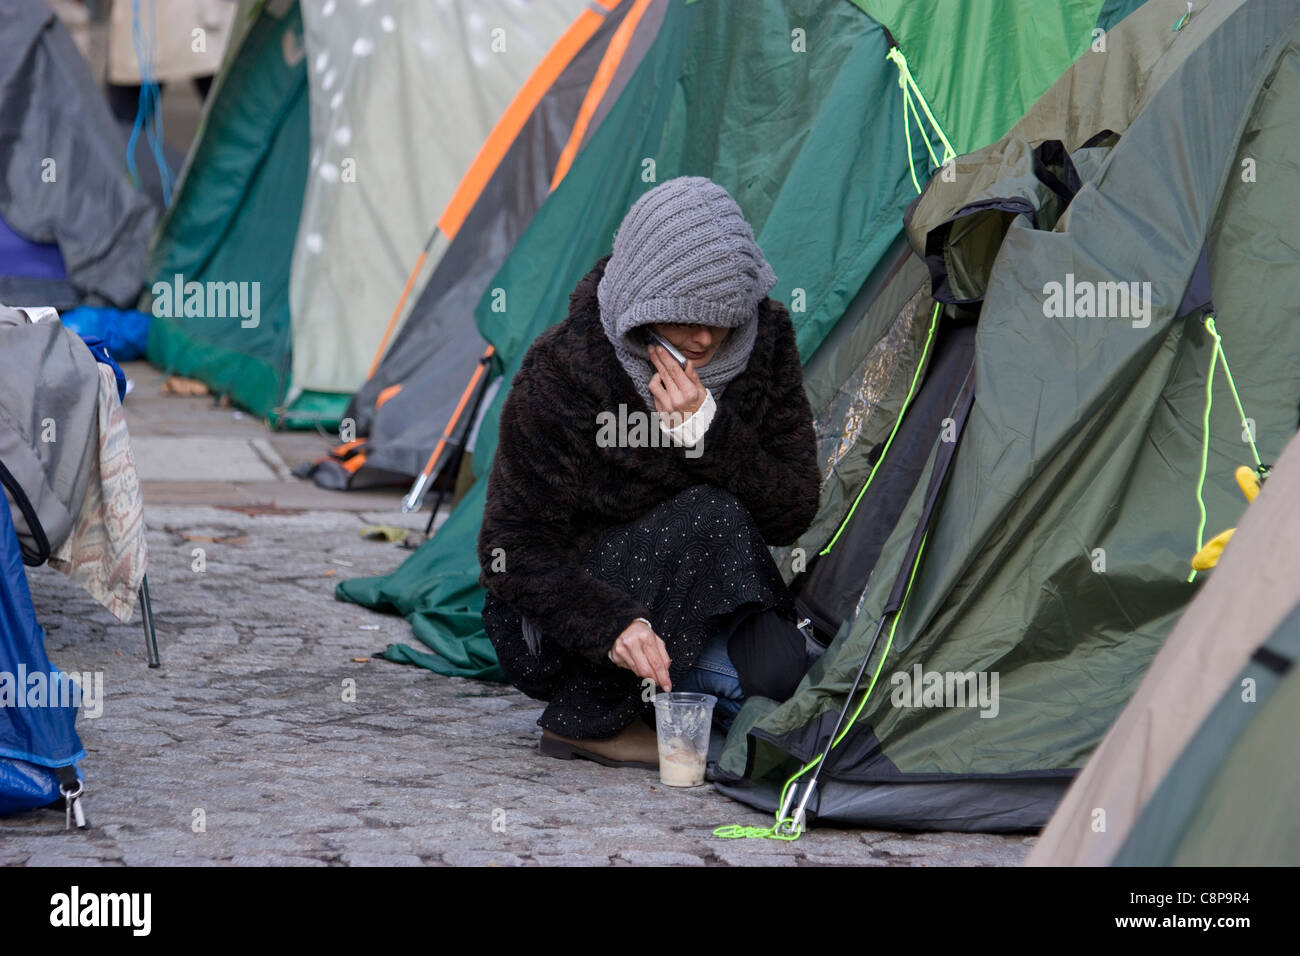 camping protestor at st pauls cathedral, occupy london protest with tents Stock Photo